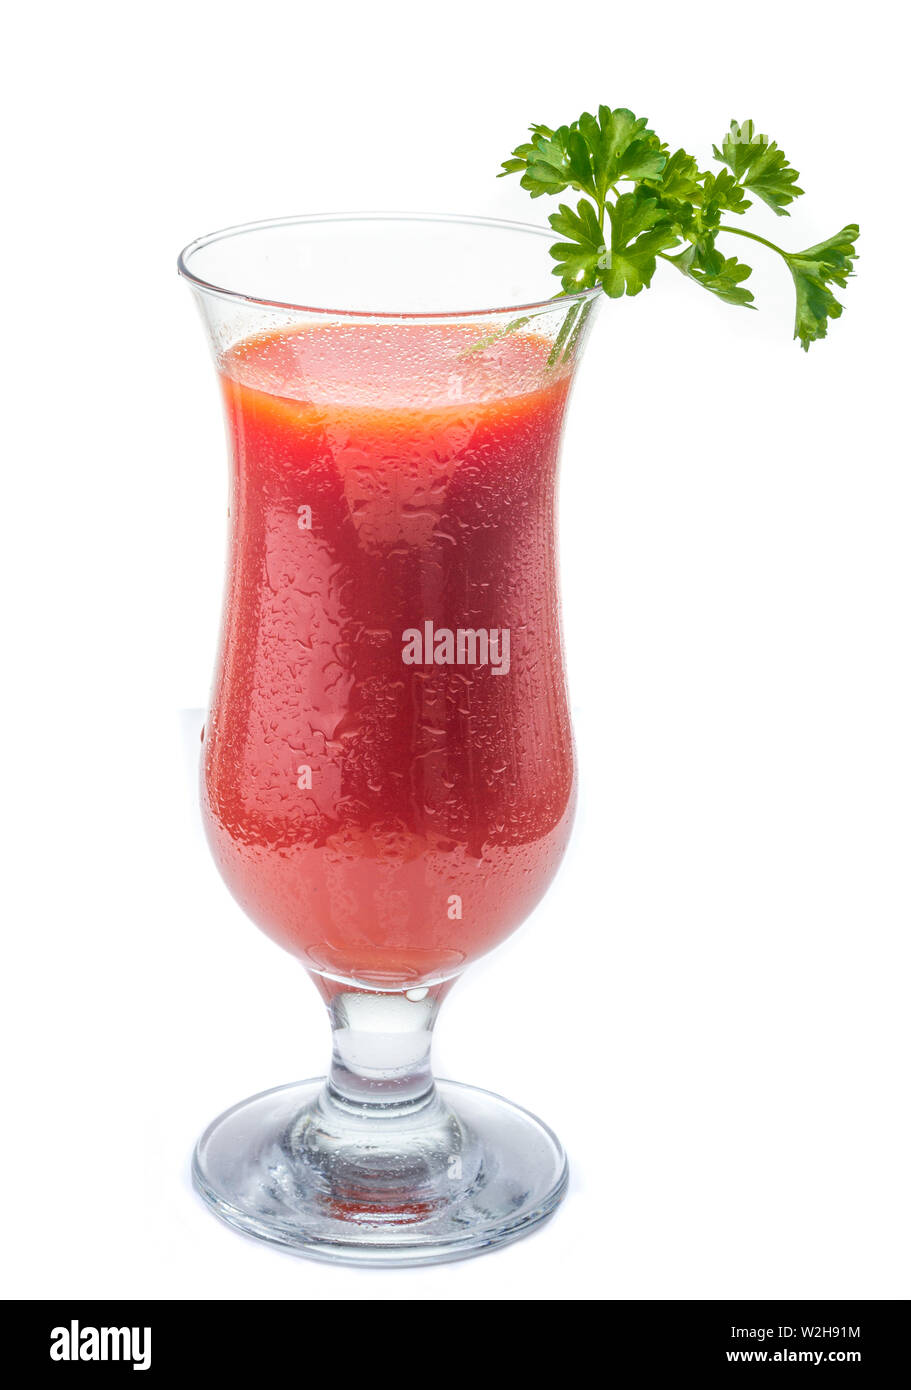 Fresh tomato juice. Juice in a glass. Red juice. Healthy drink. Tomatoes in the diet. Stock Photo